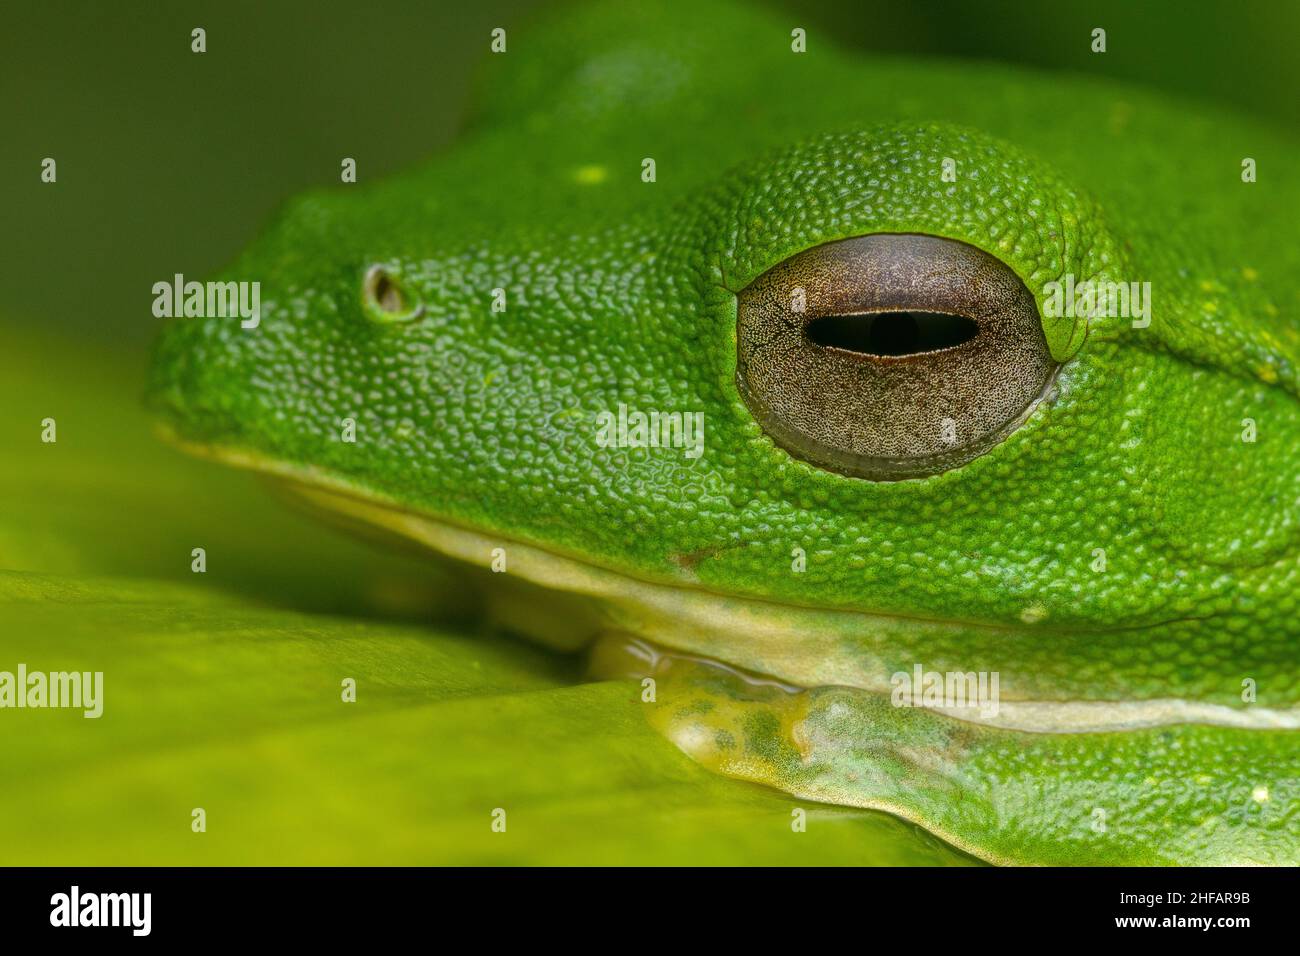 close-up portrait of malabar gliding frog showing details on face and eye Stock Photo